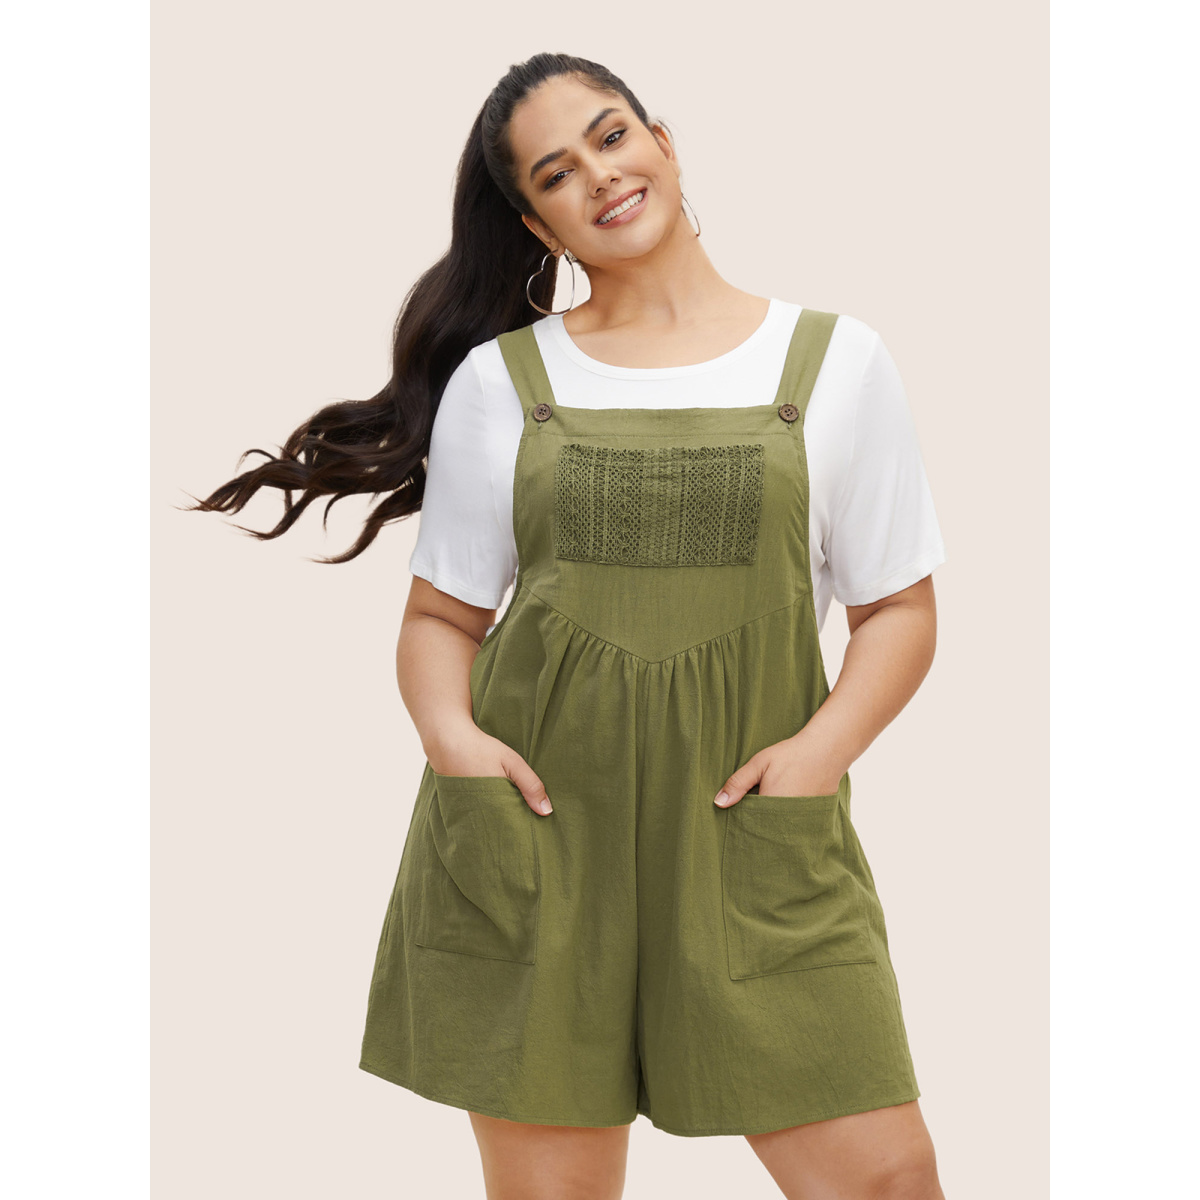 

Plus Size ArmyGreen Cotton Plain Textured Patch Pocket Jumpsuit Women Casual Sleeveless Square Neck Everyday Loose Jumpsuits BloomChic